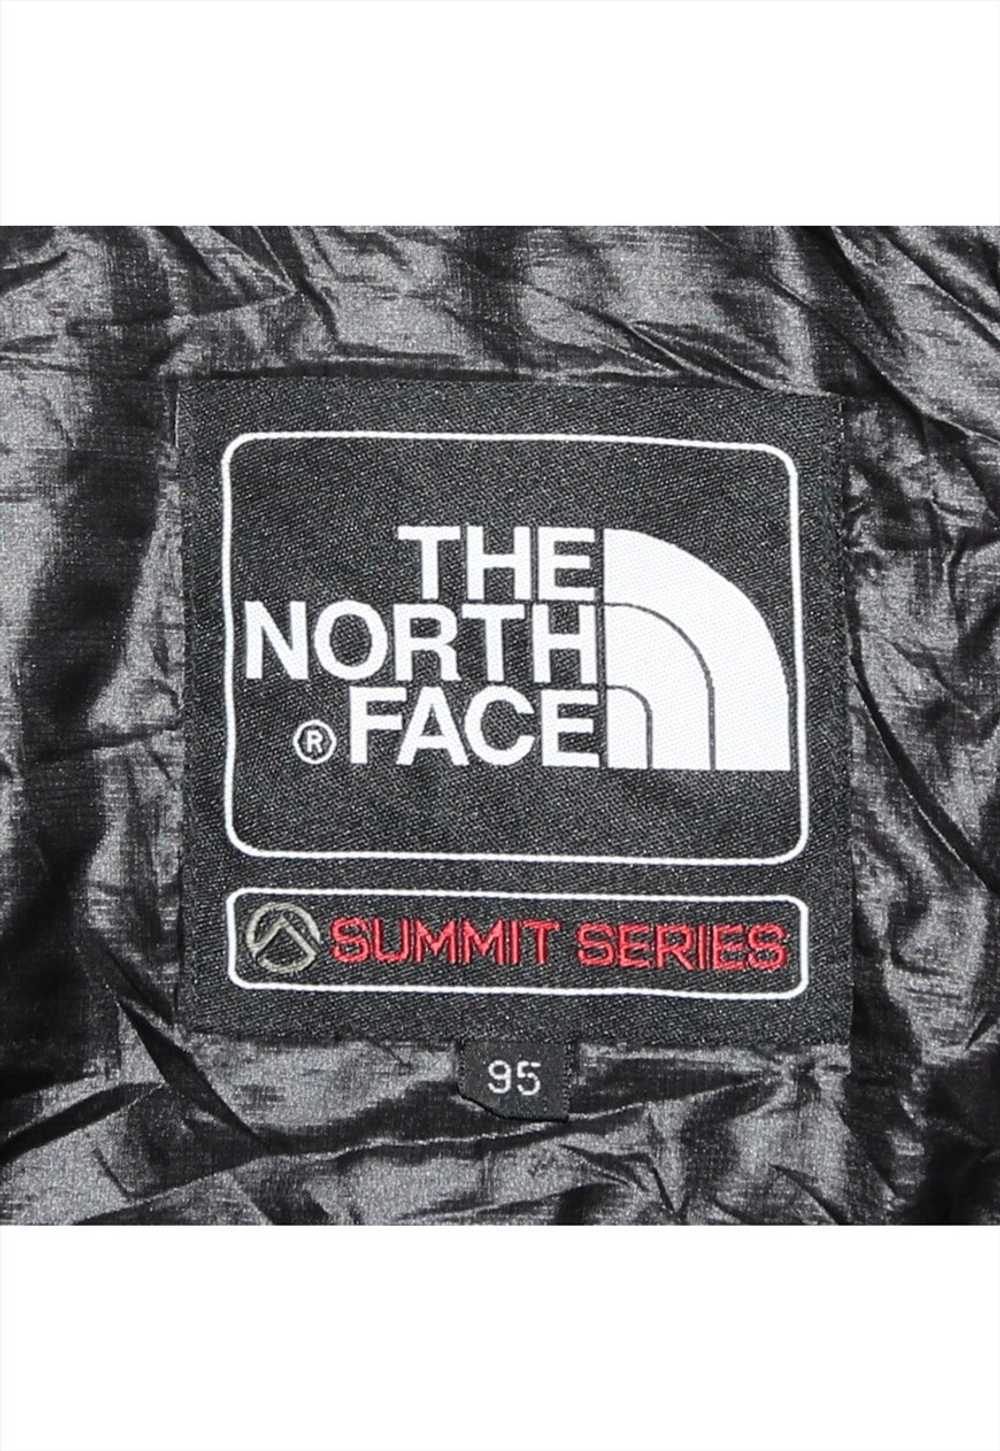 Vintage 90's The North Face Puffer Jacket Heavywe… - image 4